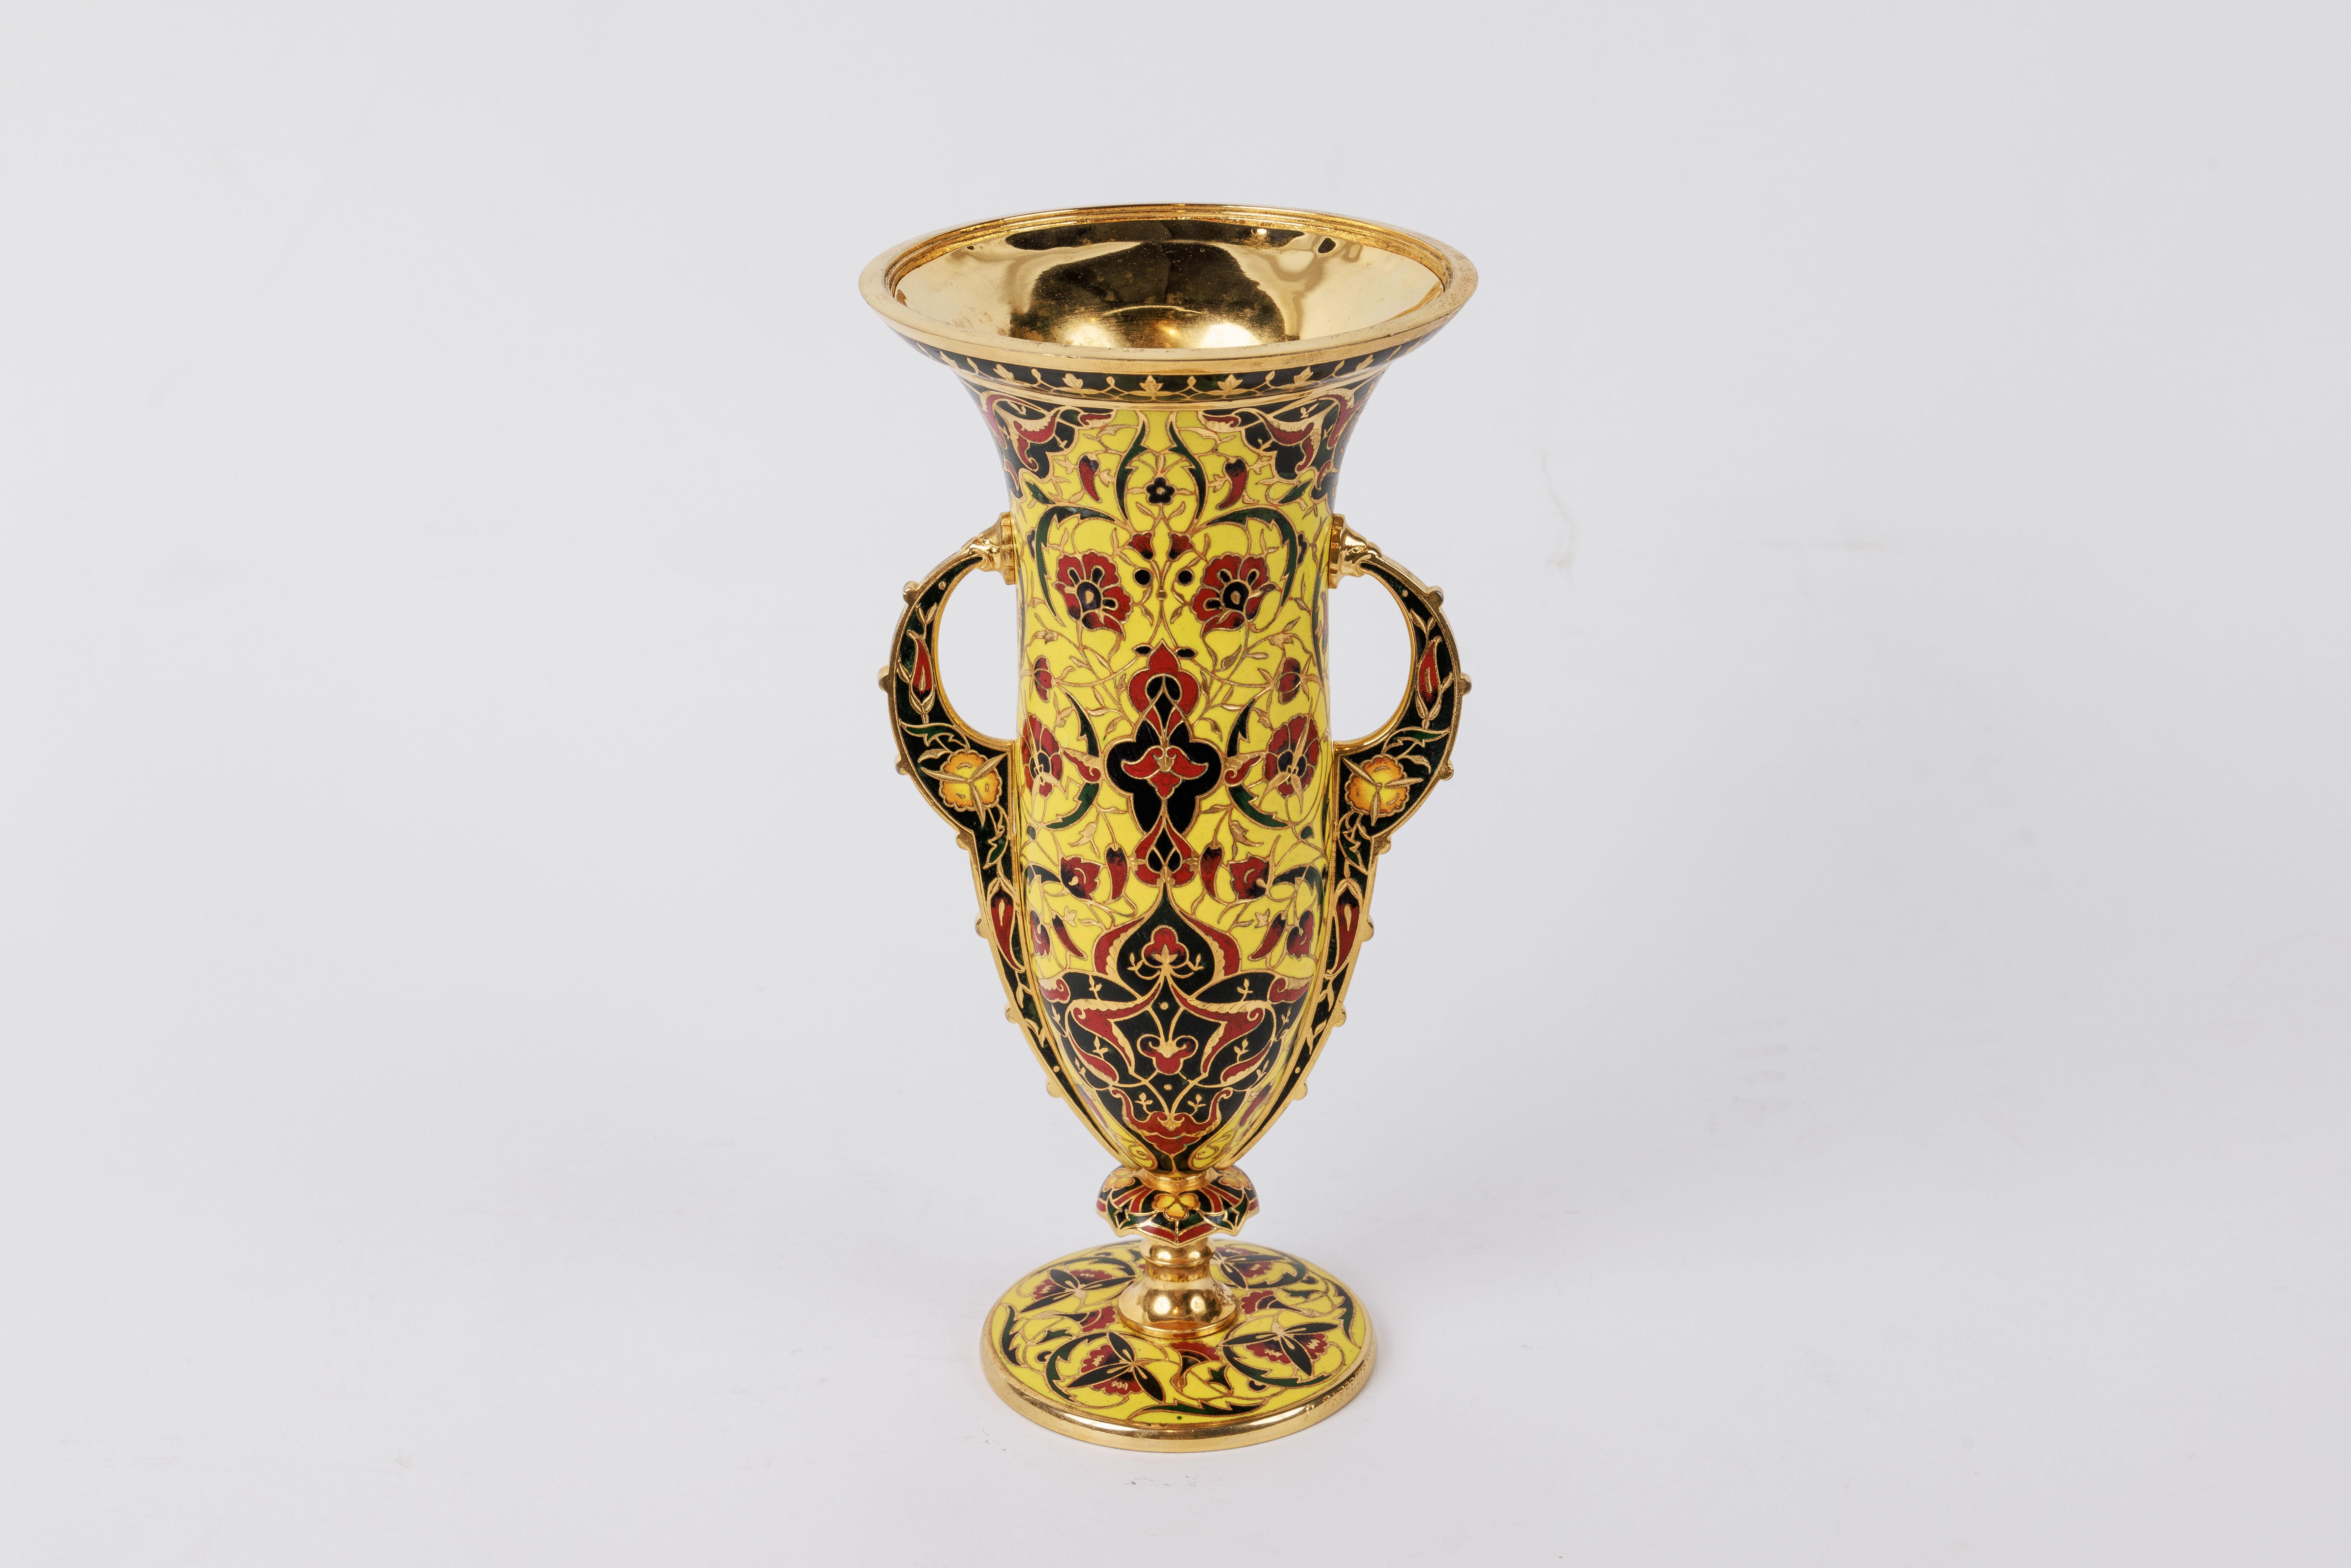 Napoleon III Ferdinand Barbedienne, A French Ormolu and Champleve Enamel Vase, C. 1870 For Sale